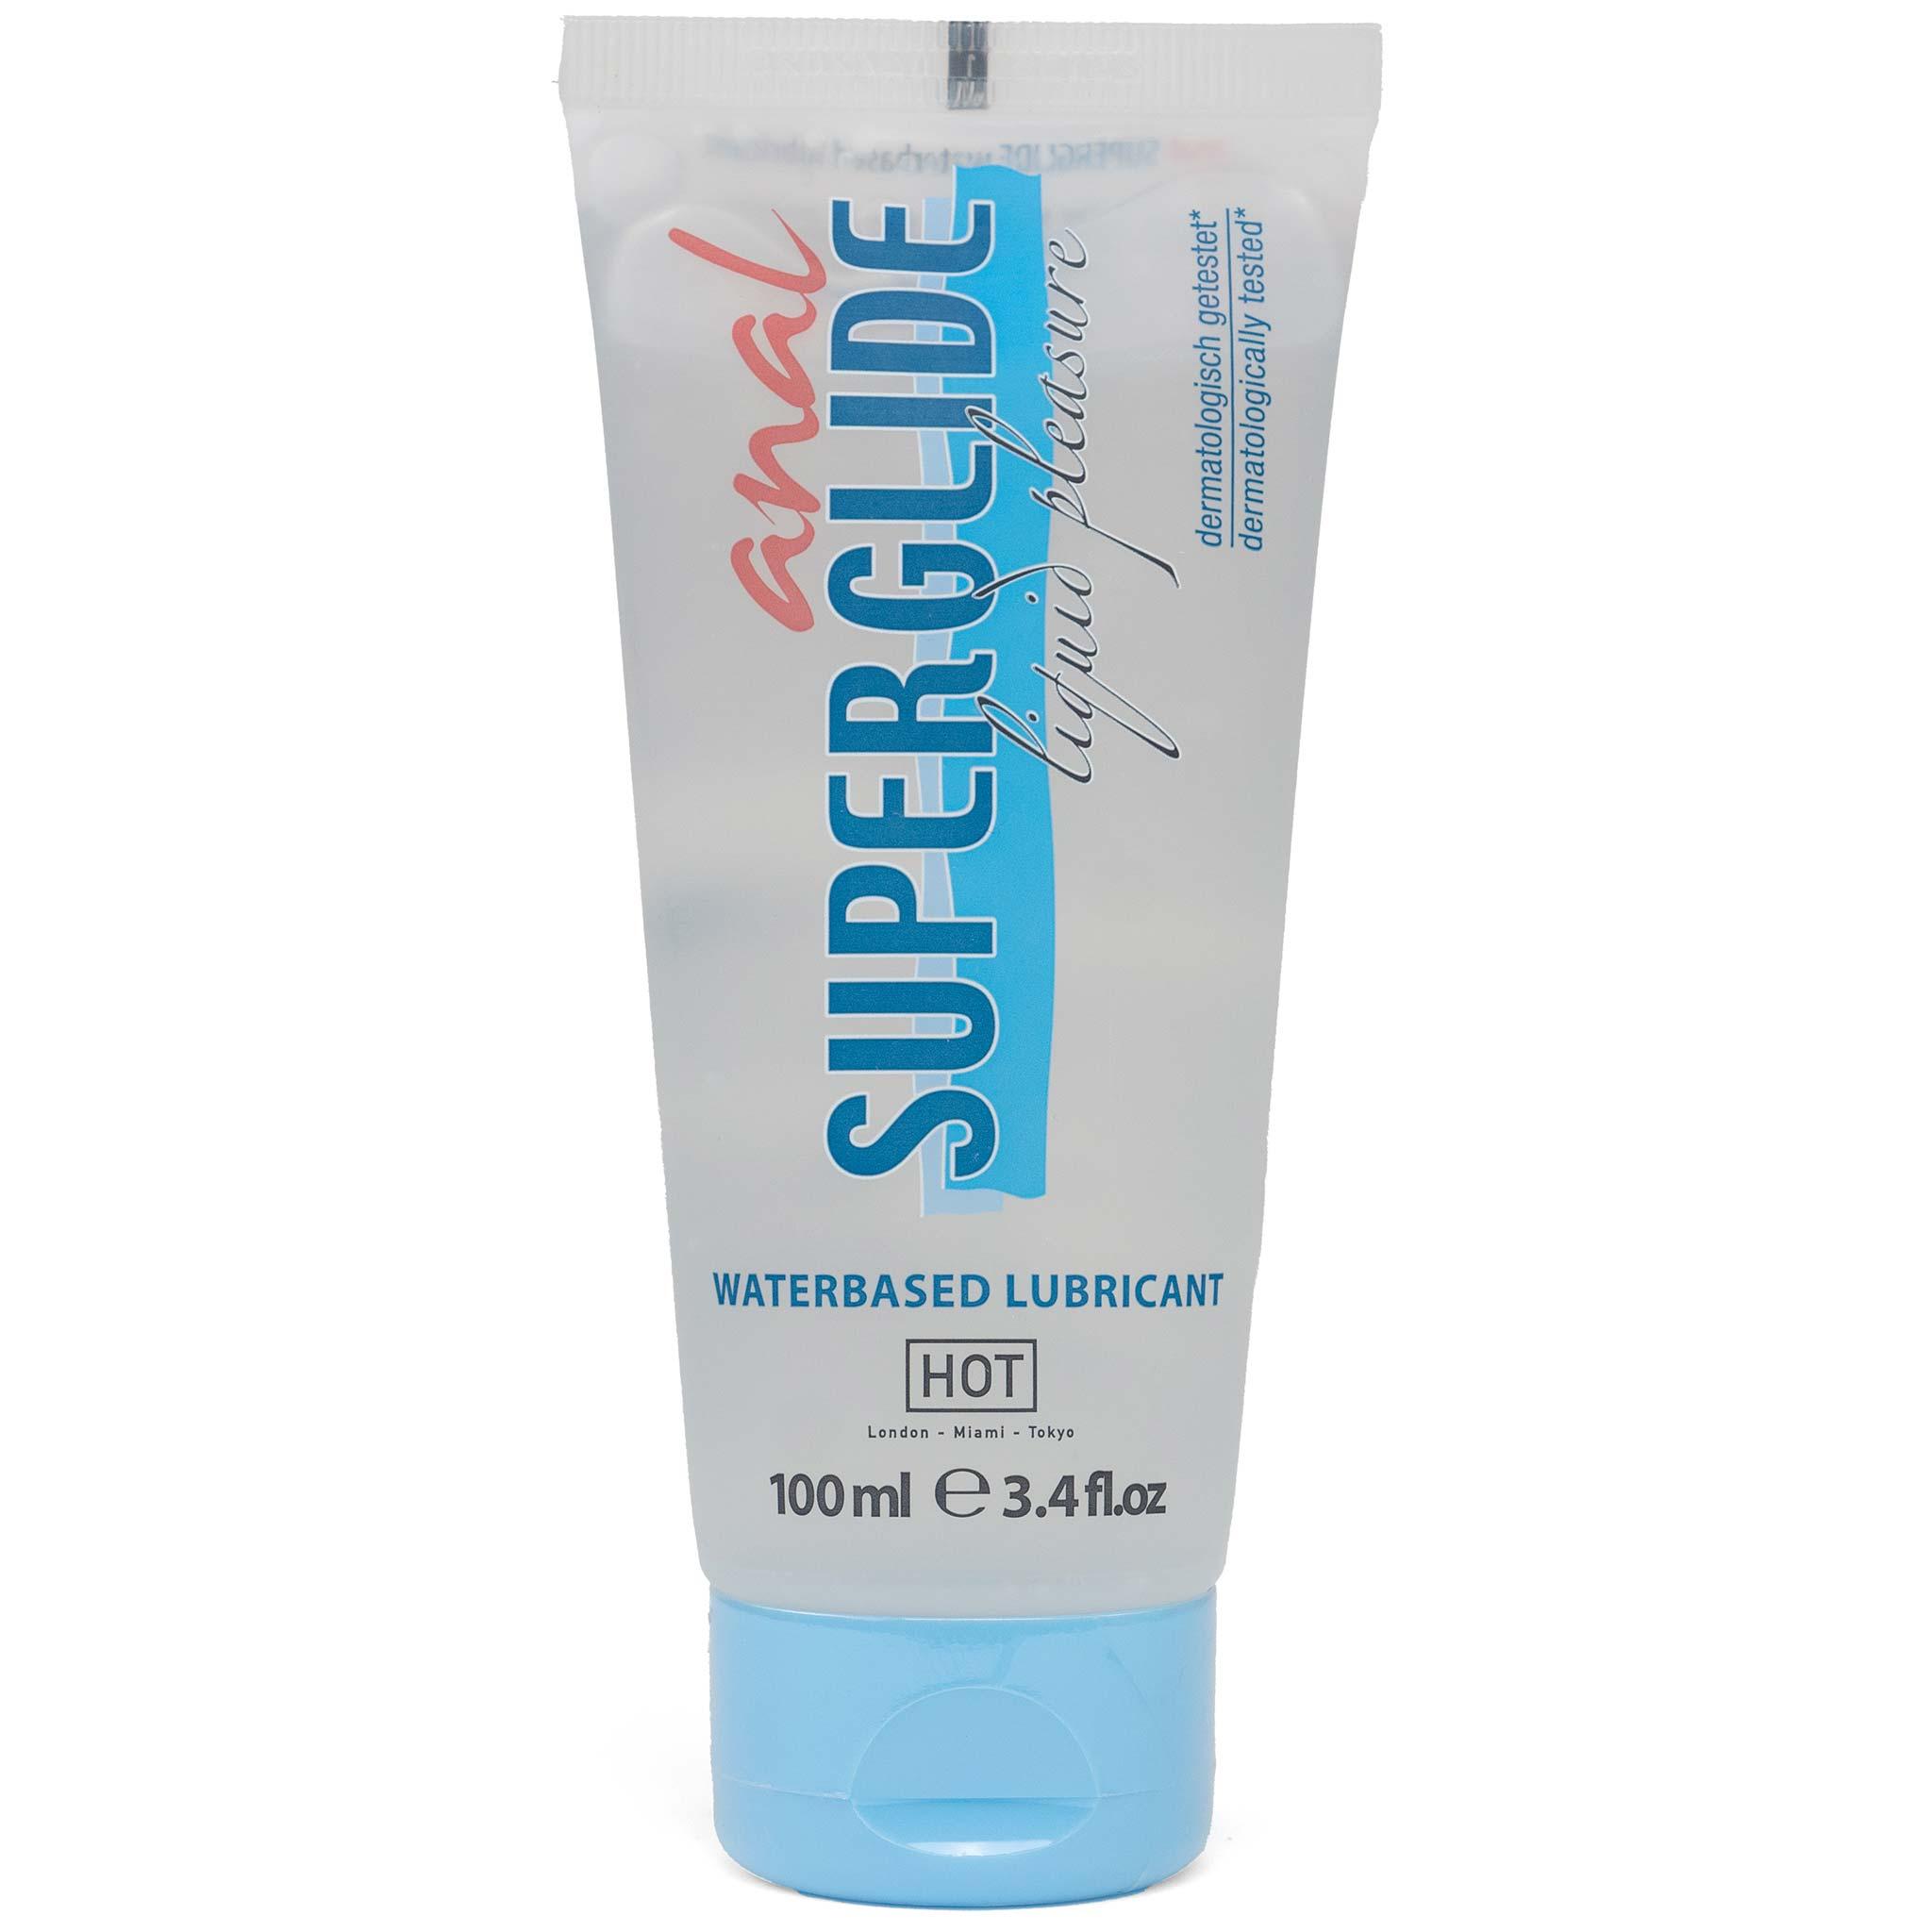 HOT ANAL SUPERGLIDE waterbased lubricant, 100ml/3.4fl.oz